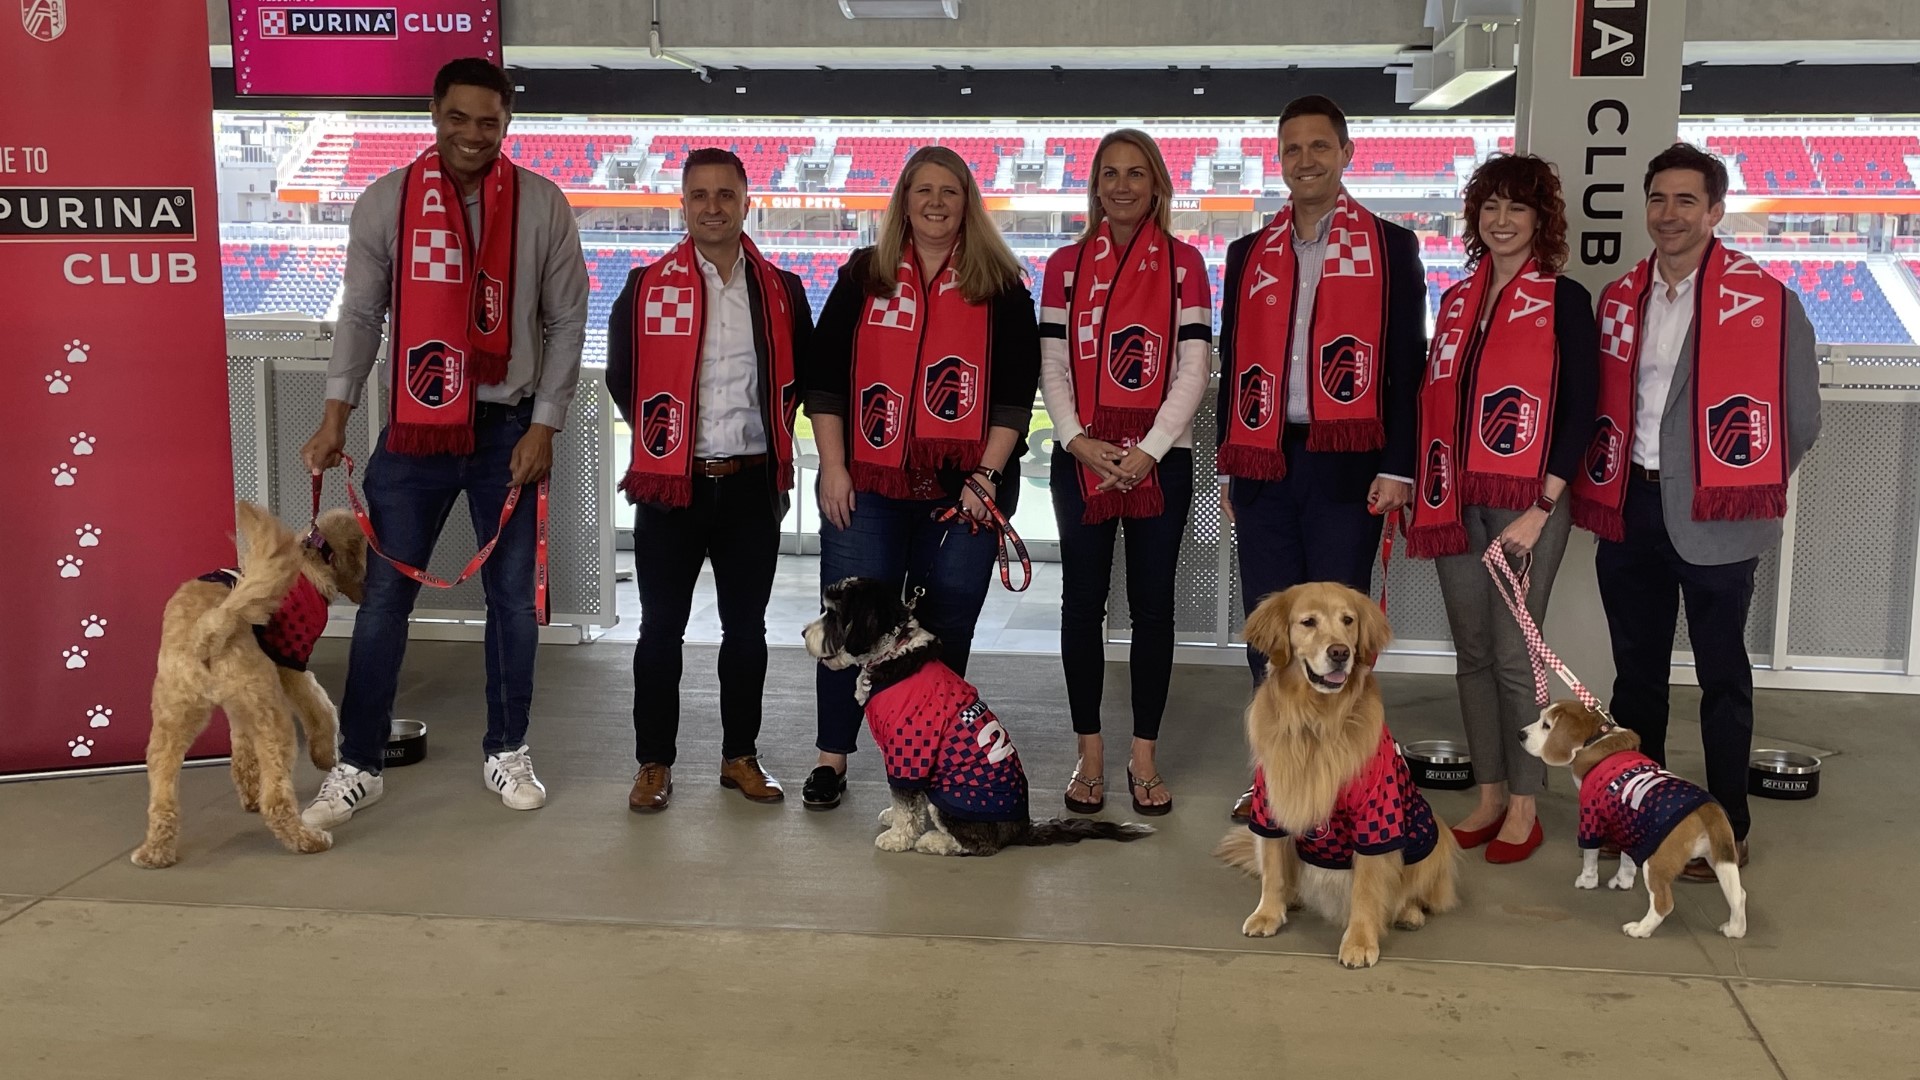 Pets on the Pitch: St. Louis CITY SC Introduces Purina as the